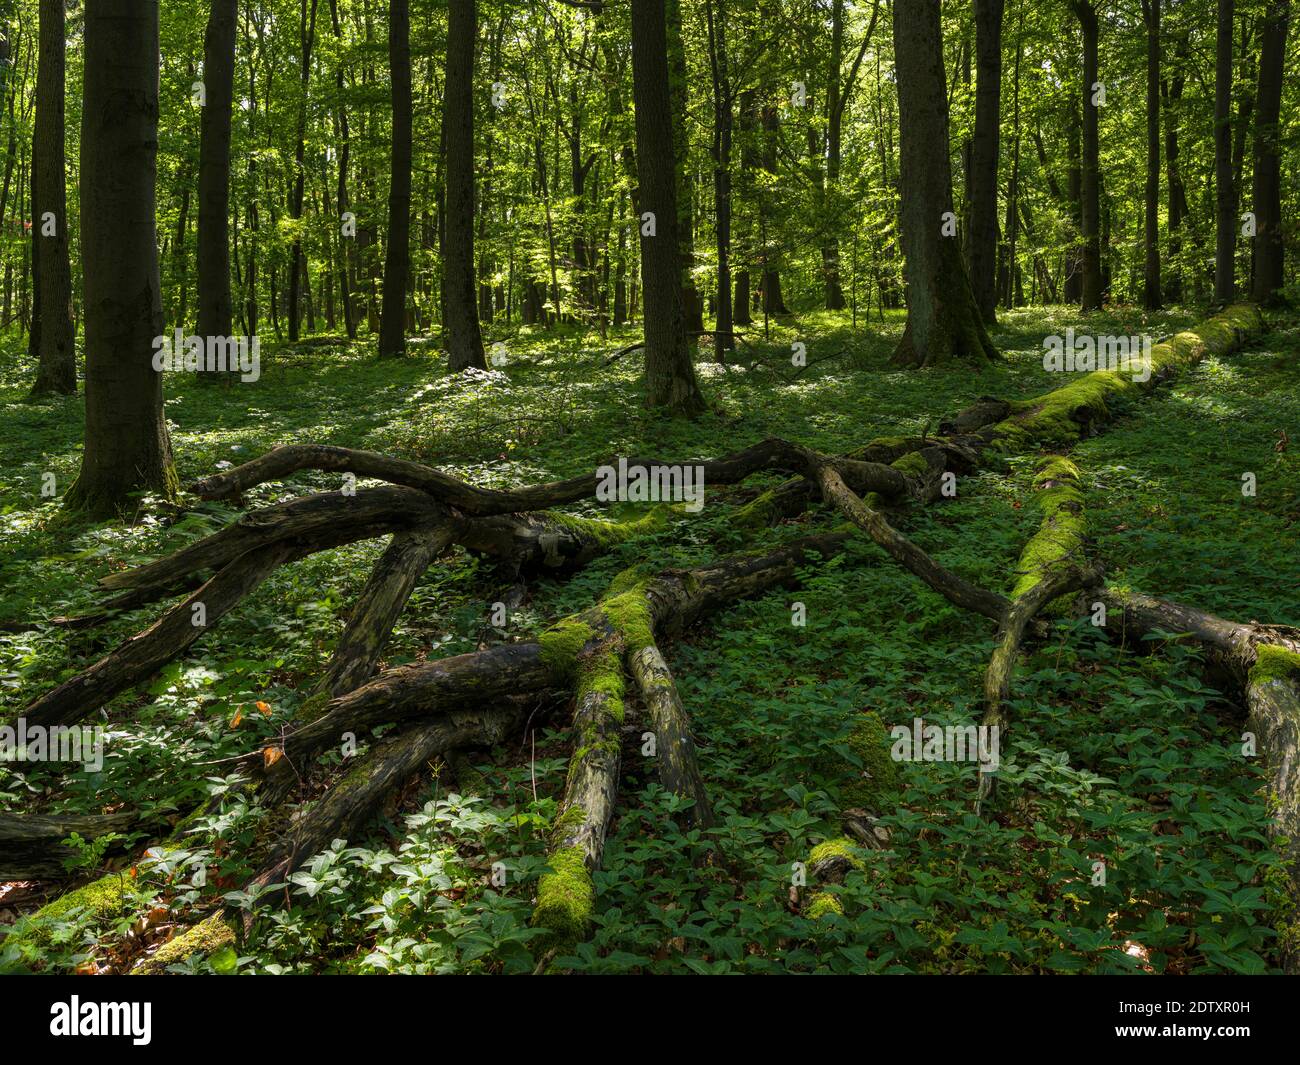 Deadwood, coarse woody debris and fallen trees in the NP.    The woodland Hainich in Thuringia, National Park and  part of the UNESCO world heritage - Stock Photo